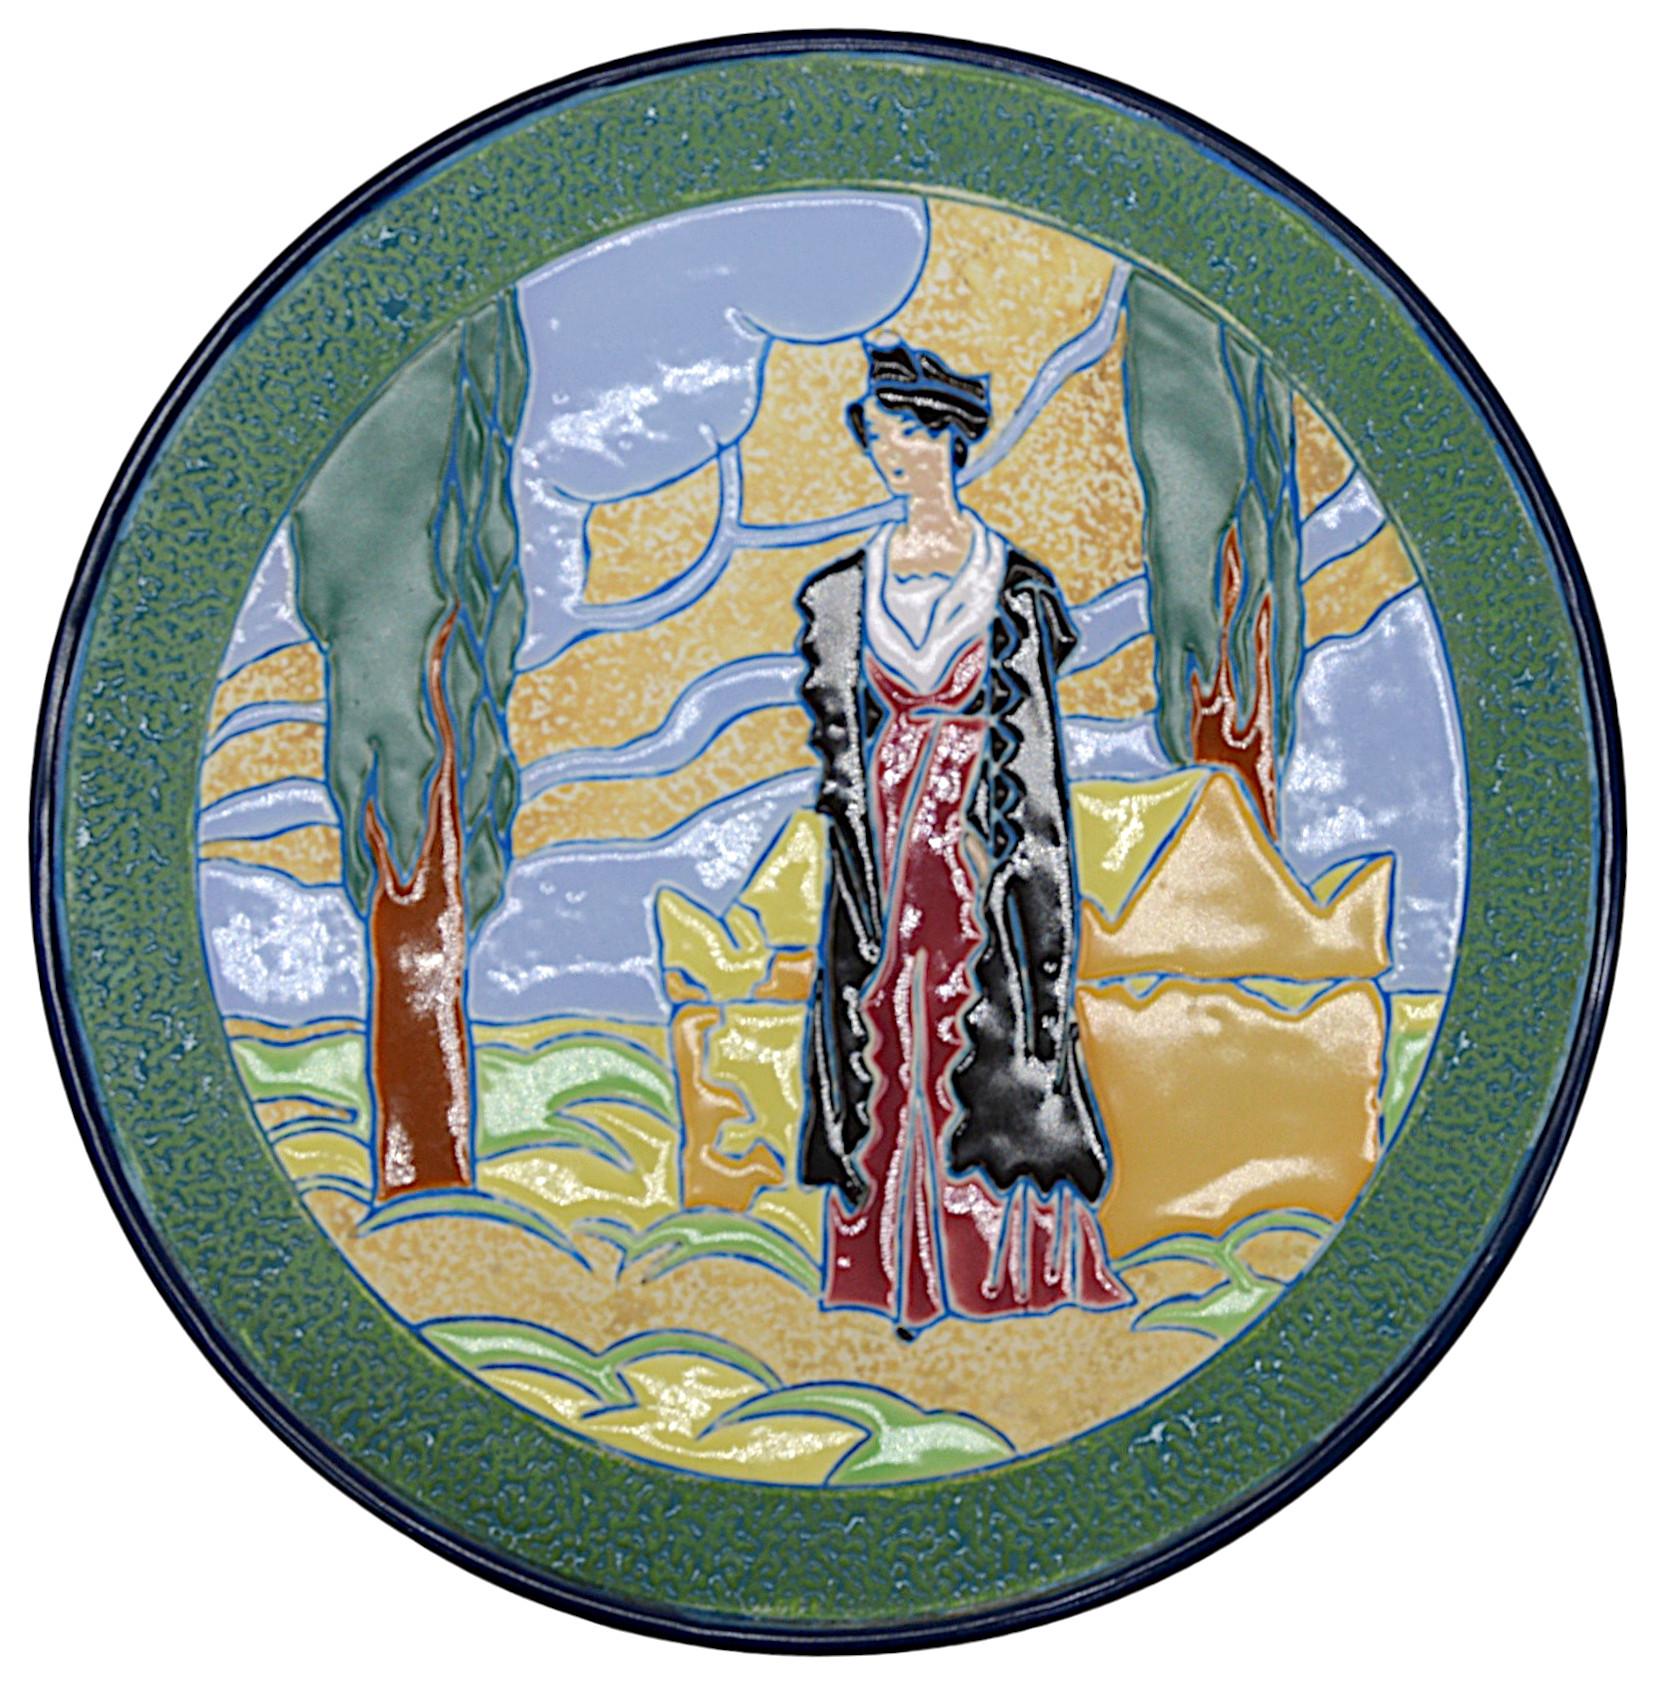 Pair of Art Deco ceramic wall plates by Amphora, circa 1930. Provencal design. Decor of young Provencal girls in a landscape typical of the Art Deco years. Young women are dressed in the fashion of Arles, Fontvielle, Saint-Remy-de-Provence, Nimes,